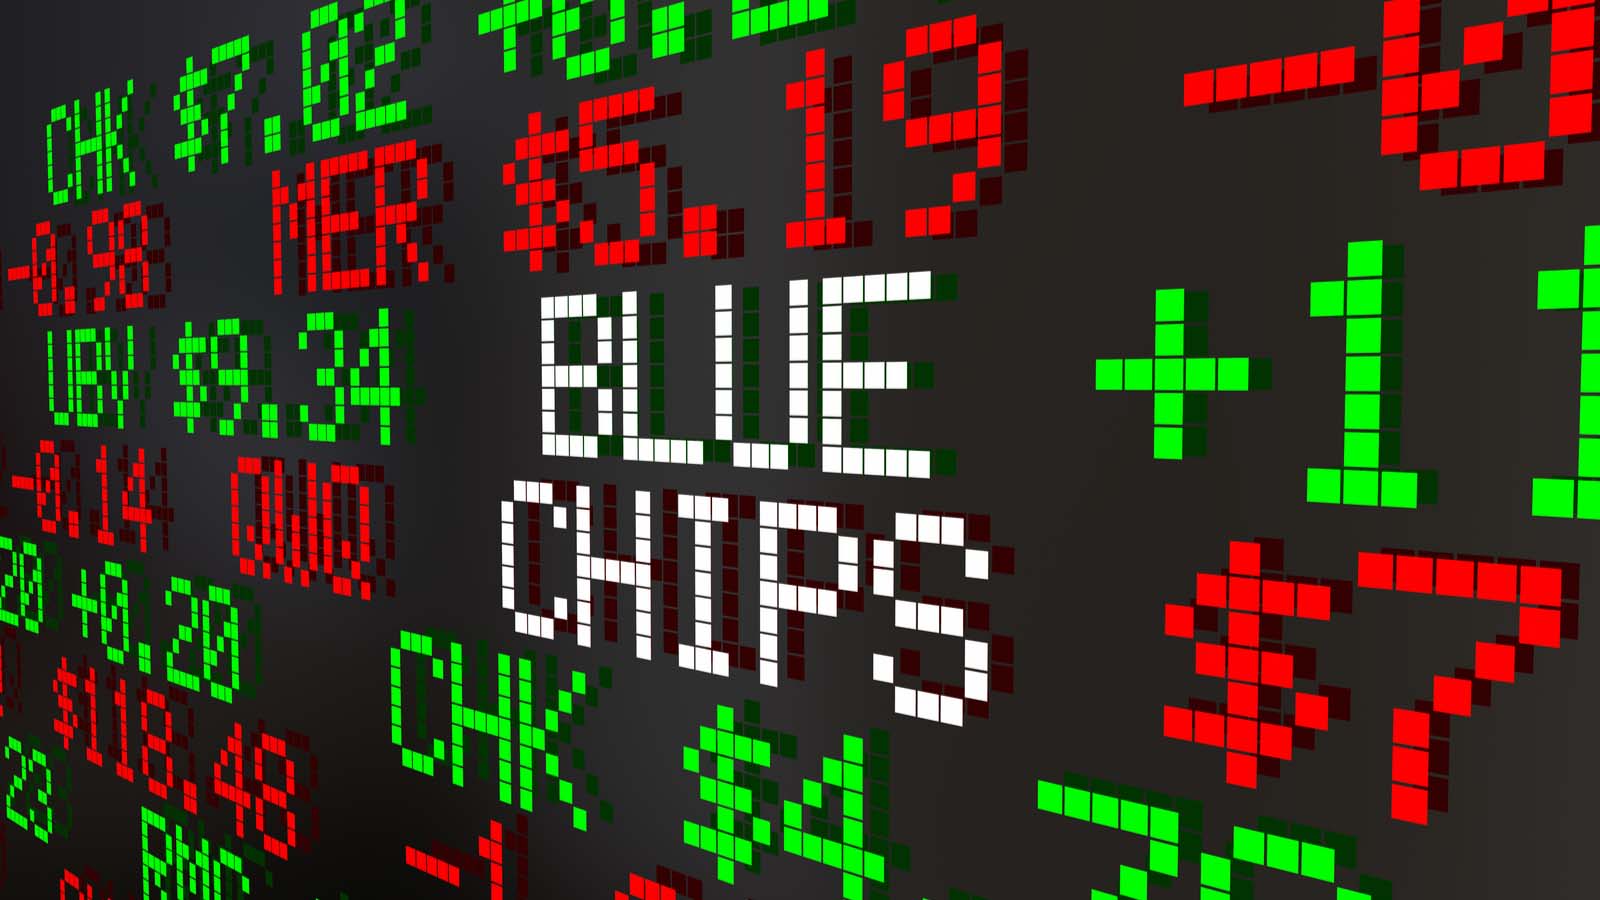 Looking for Long-Term Picks? The 3 Best Blue-Chip Stocks to Buy and Hold Now